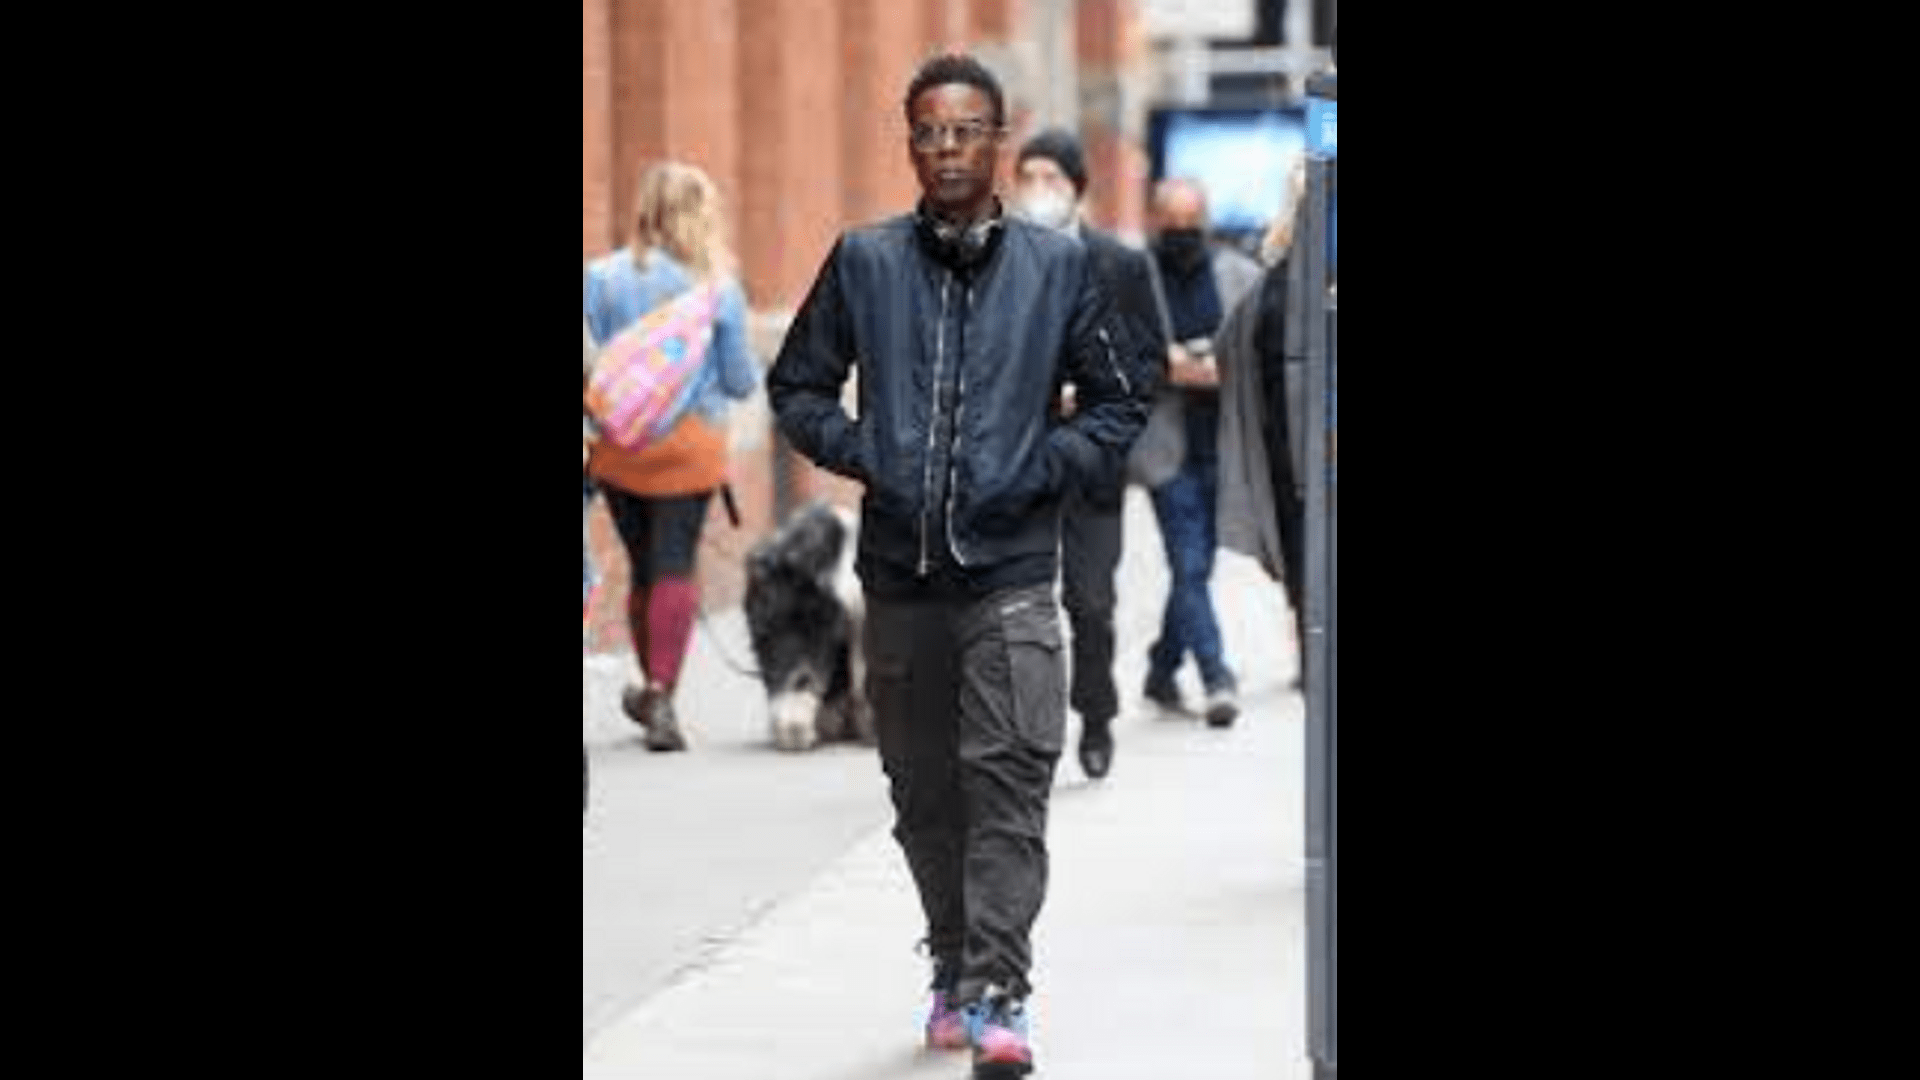 chris-rock-looks-serious-in-new-york-in-a-rare-photo-after-the-oscar-slap